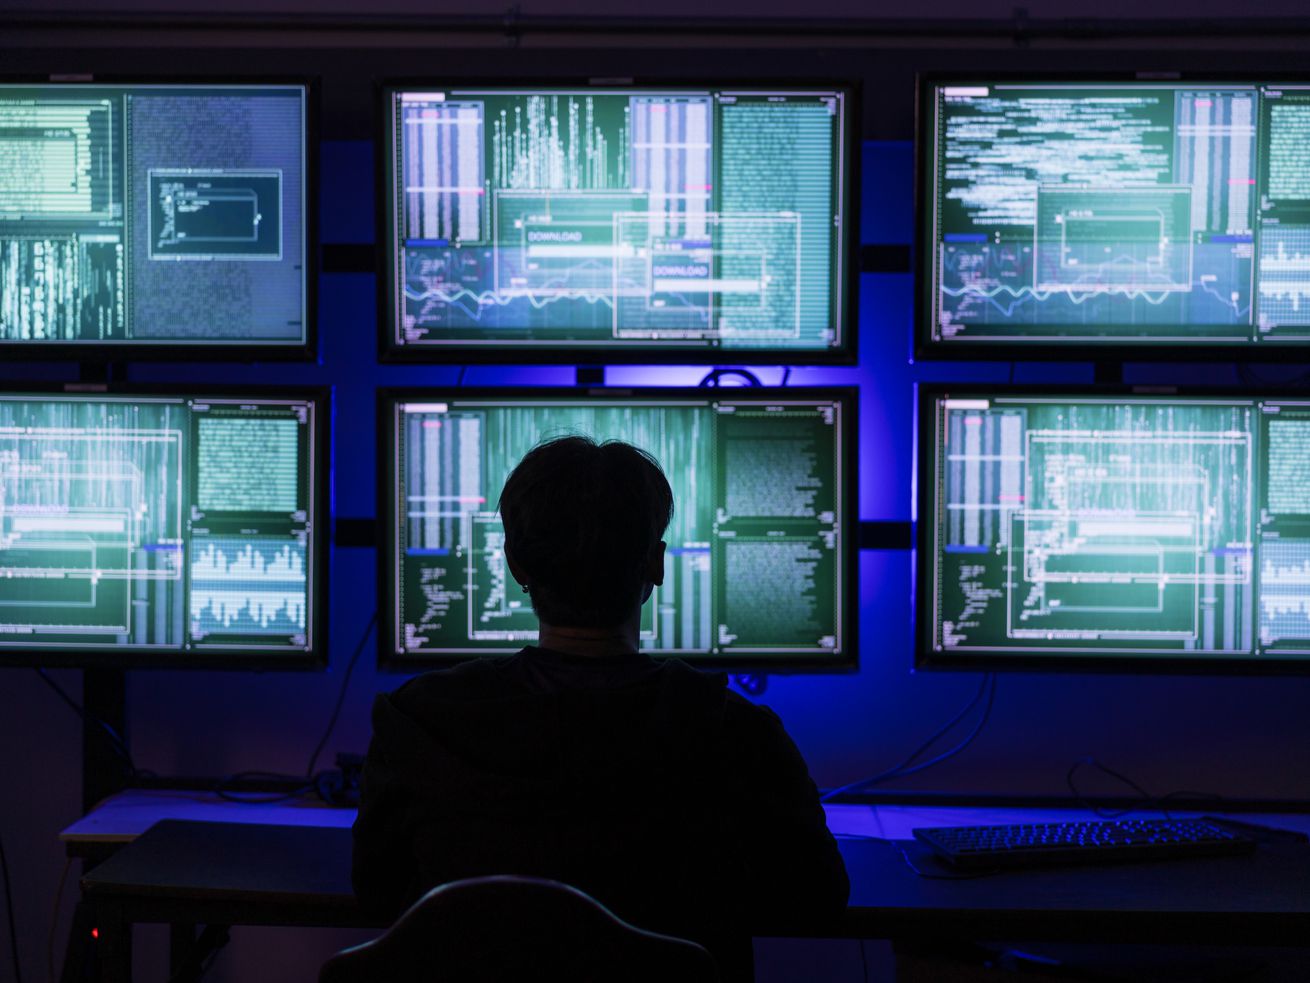 A silhouetted person sitting in front of six computer screens full of data.